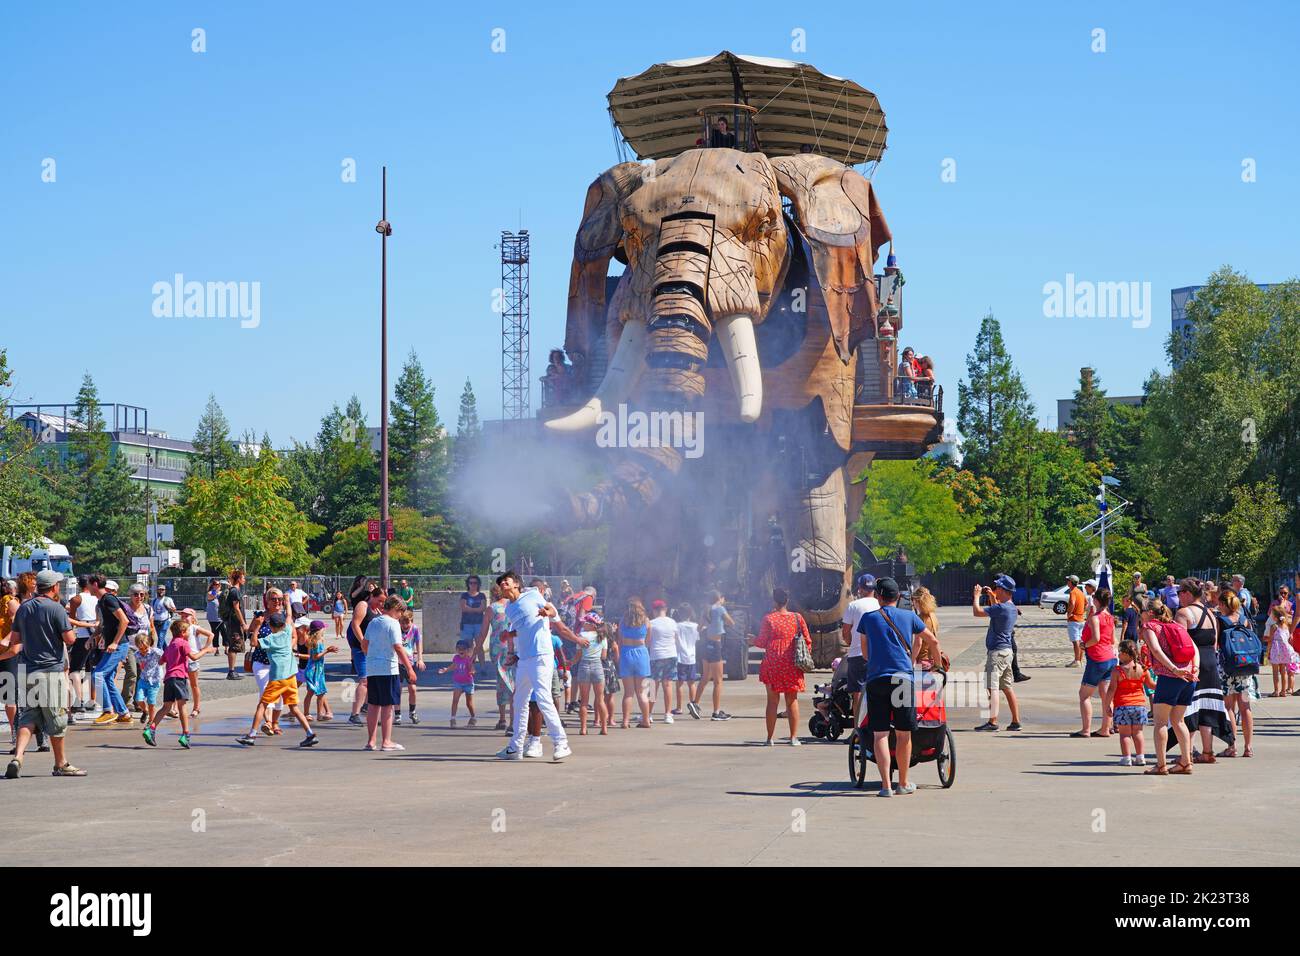 NANTES, FRANCE -10 AUG 2022- View of the Great Elephant, a giant wooden mechanical elephant at the Machines of the Isle of Nantes, France. Stock Photo